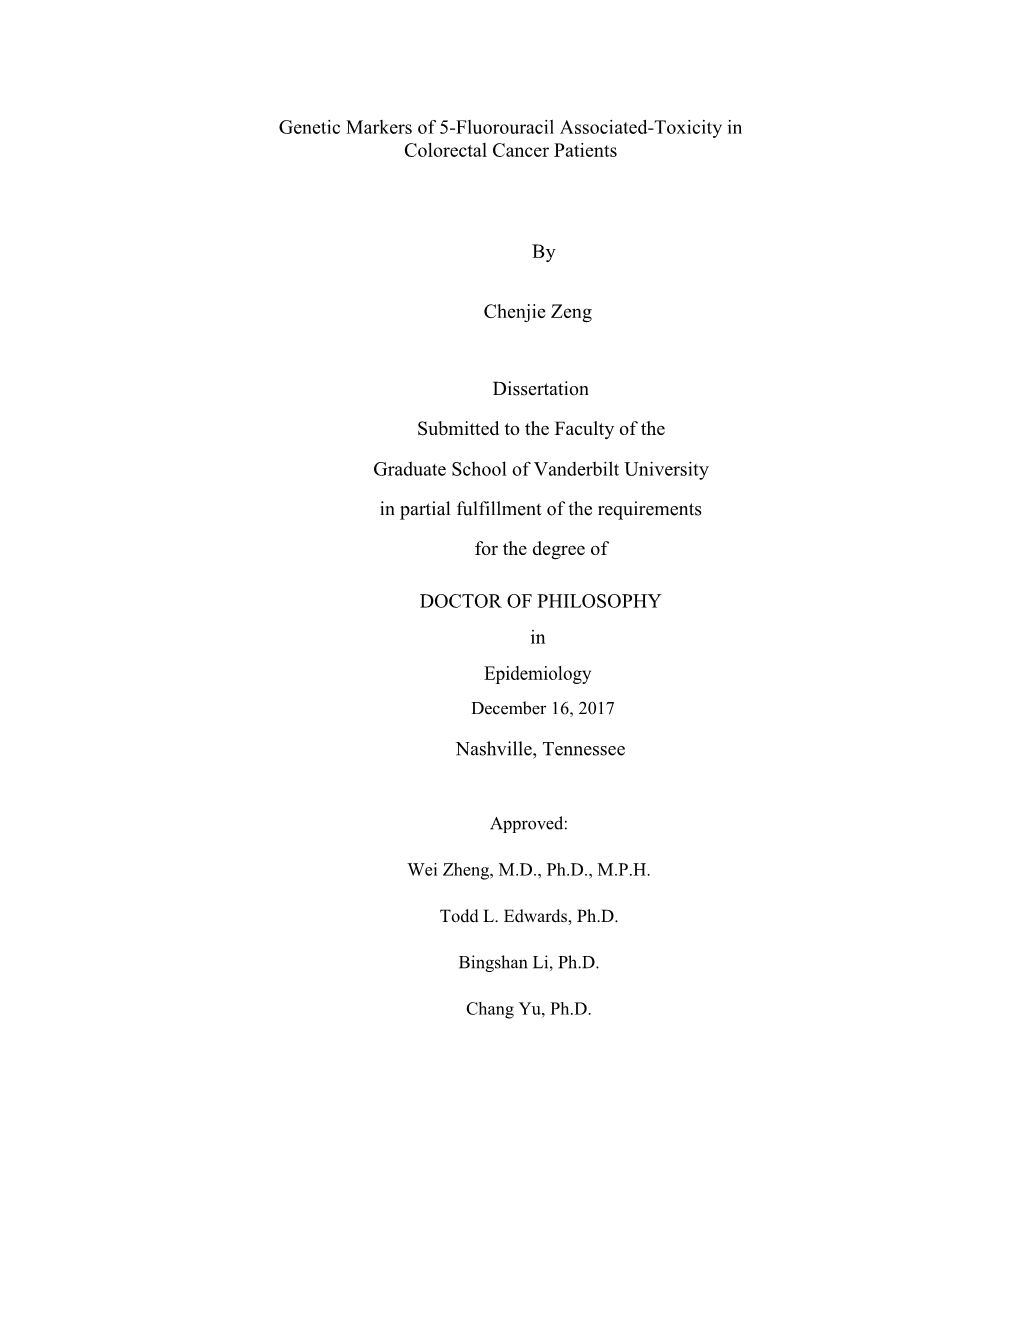 Genetic Markers of 5-Fluorouracil Associated-Toxicity in Colorectal Cancer Patients by Chenjie Zeng Dissertation Submitted to Th